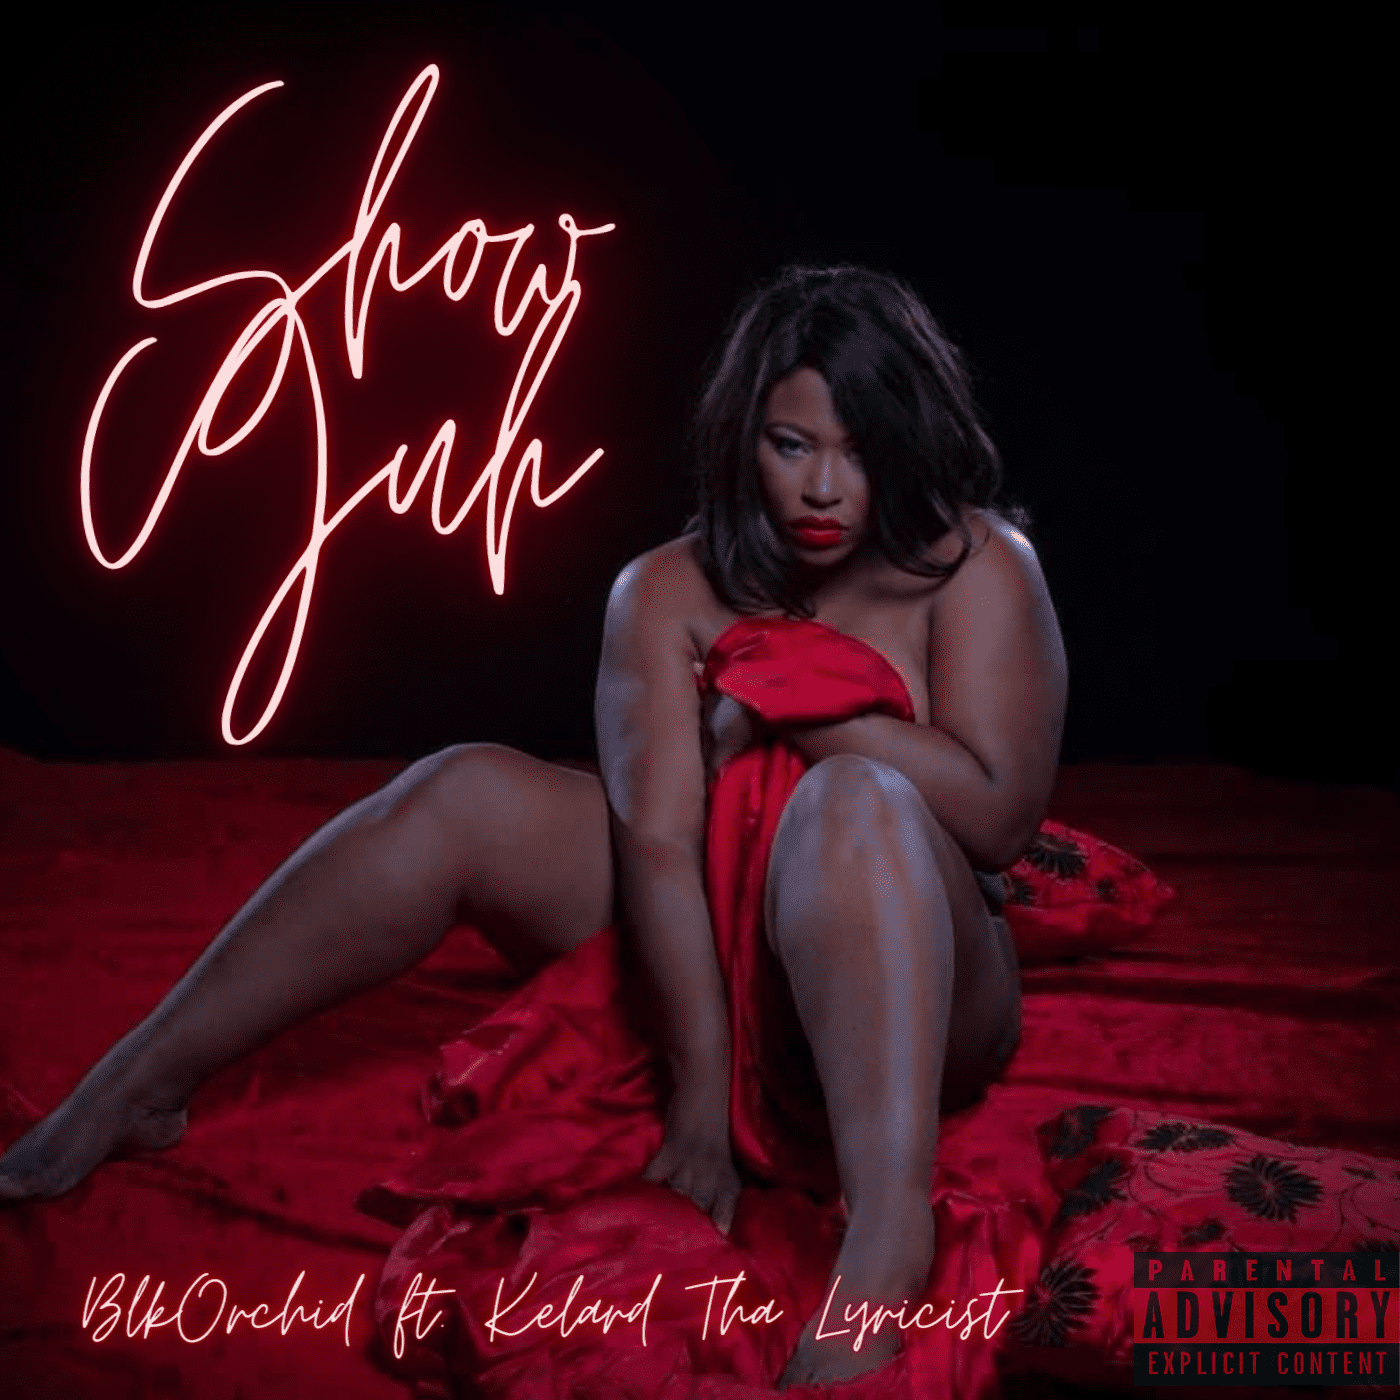 Cover art for Blk Orchid's song: Show Yuh (Ft. Kelard Tha Lyricist)